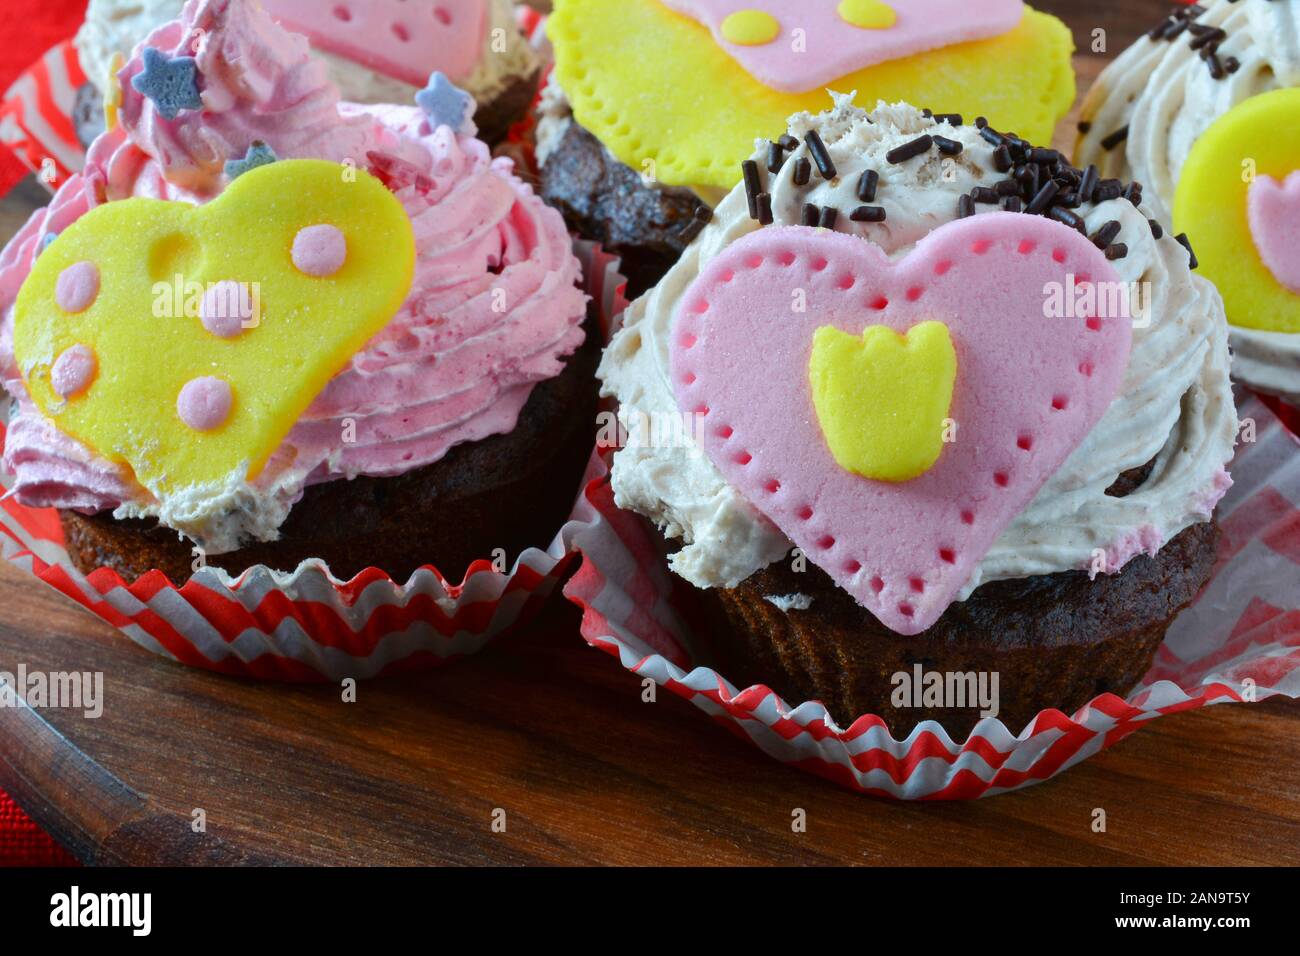 Valentine love muffins, colorful cupcakes decorated with marzipan hearts served on wooden round saucer over red table cloth, close up view Stock Photo